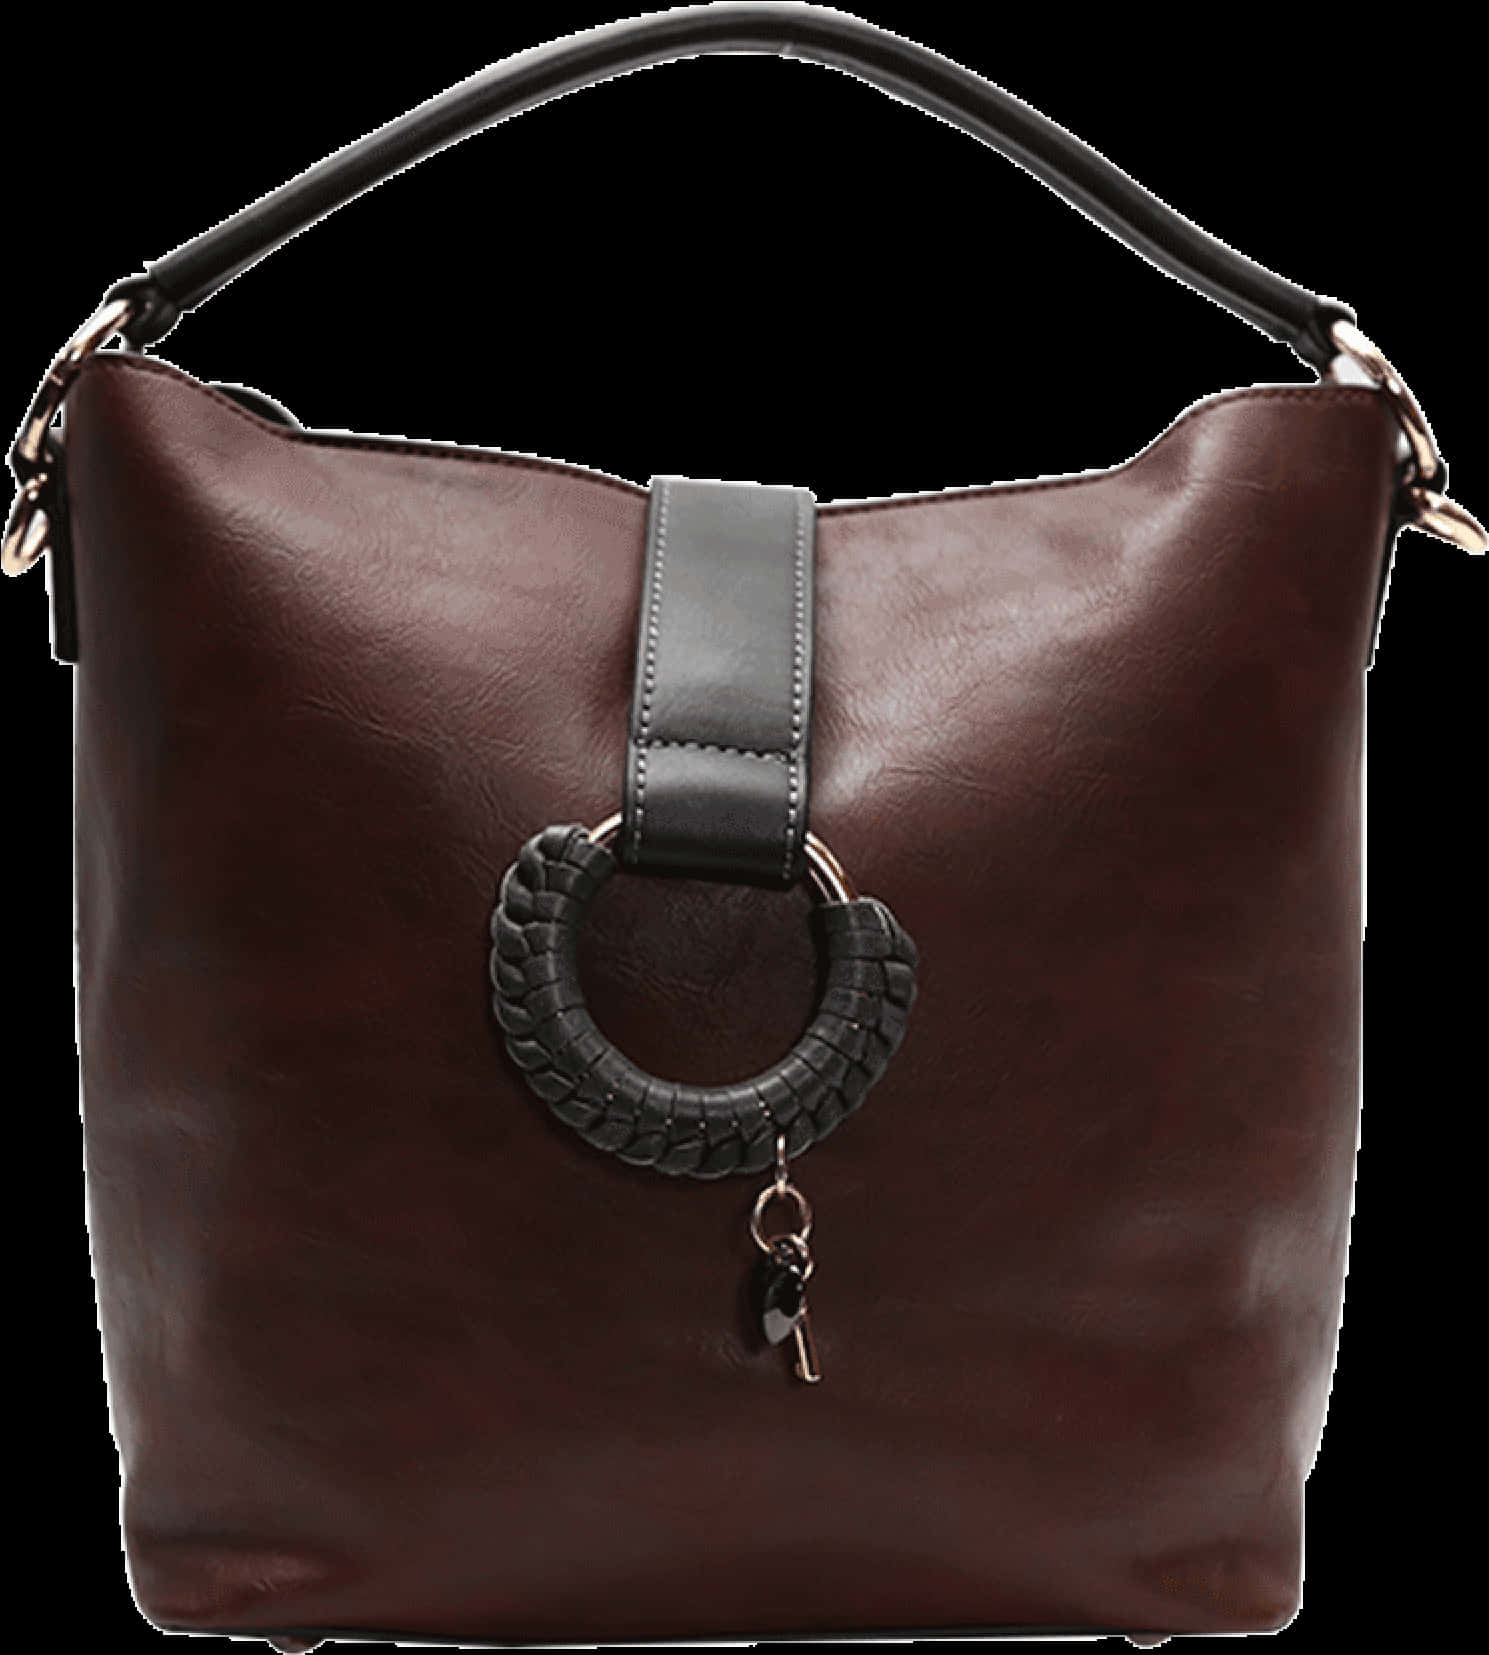 A Brown Purse With A Black Handle